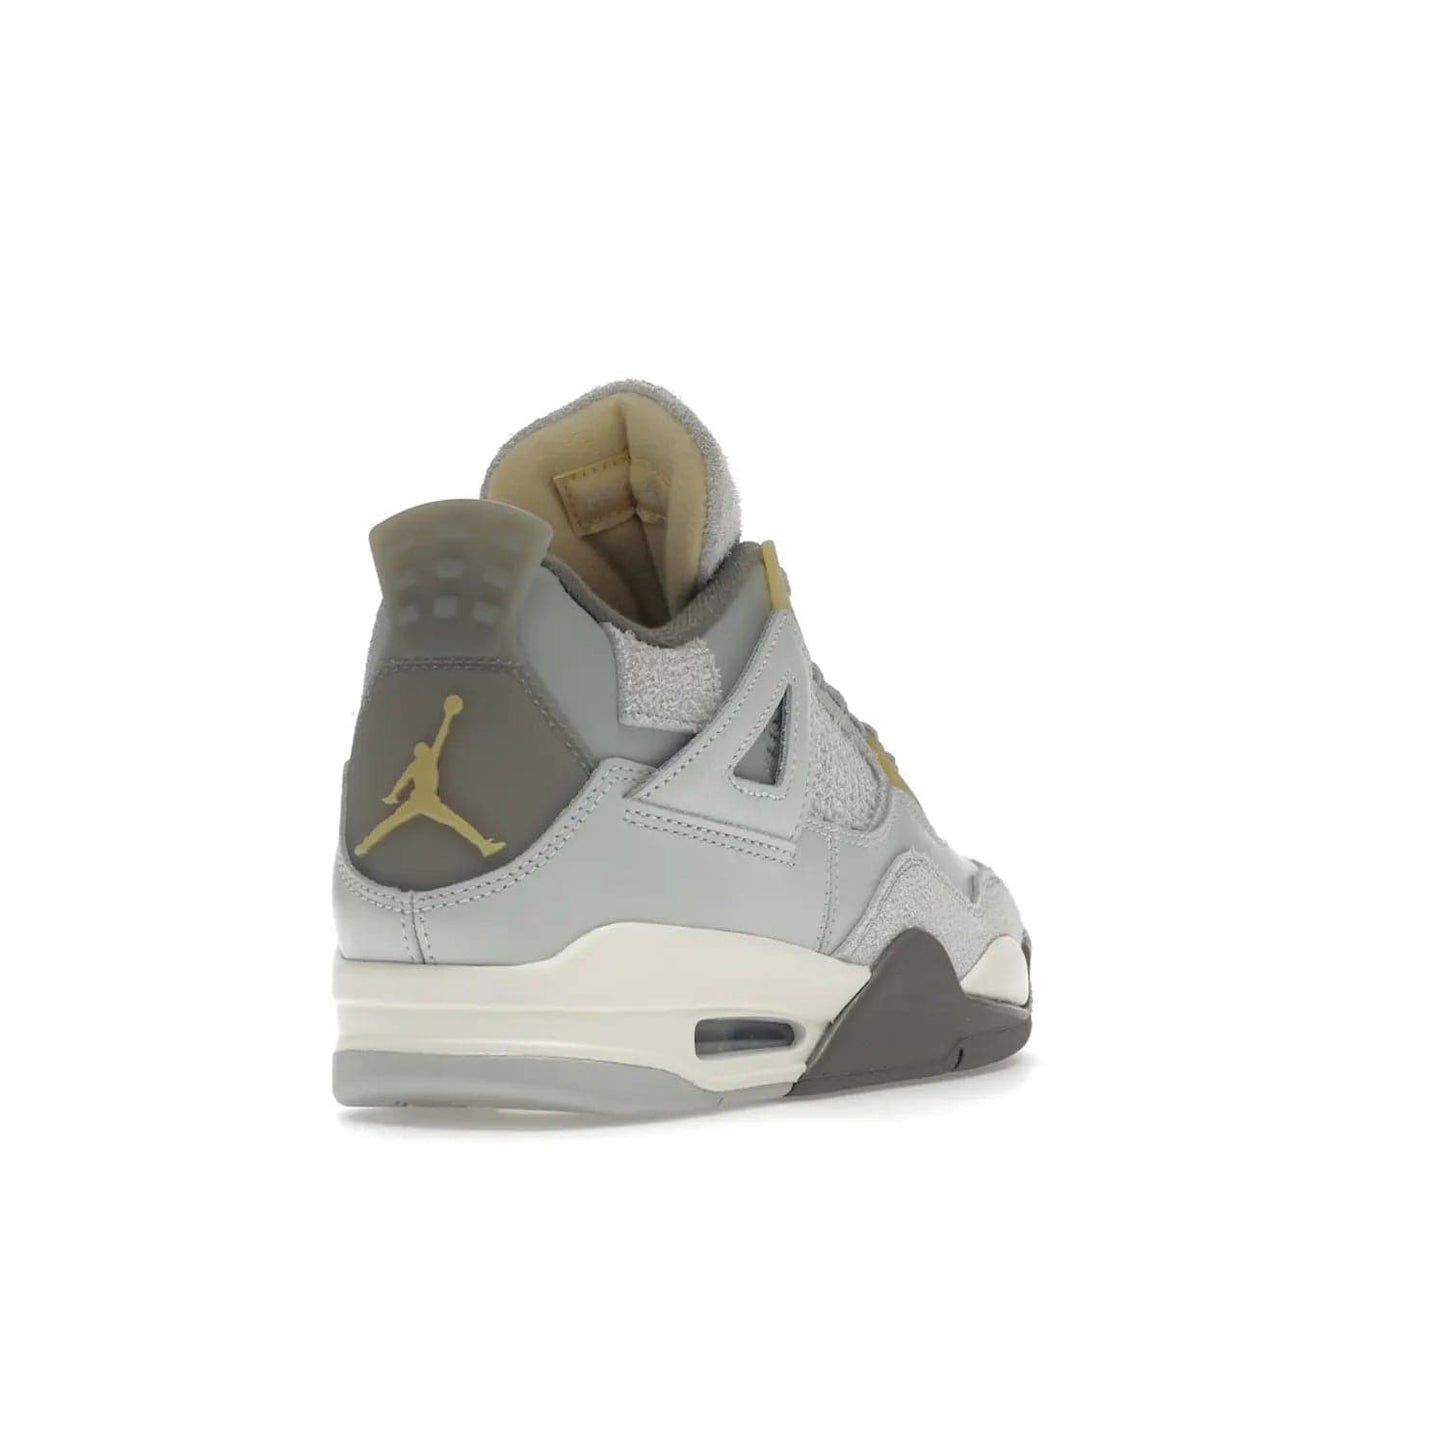 Jordan 4 Retro SE Craft Photon Dust - Image 31 - Only at www.BallersClubKickz.com - Upgrade your shoe collection with the Air Jordan 4 Retro SE Craft Photon Dust. This luxurious sneaker features a combination of suede and leather with unique grey tones like Photon Dust, Pale Vanilla, Off White, Grey Fog, Flat Pewter, and Sail. Available February 11, 2023.